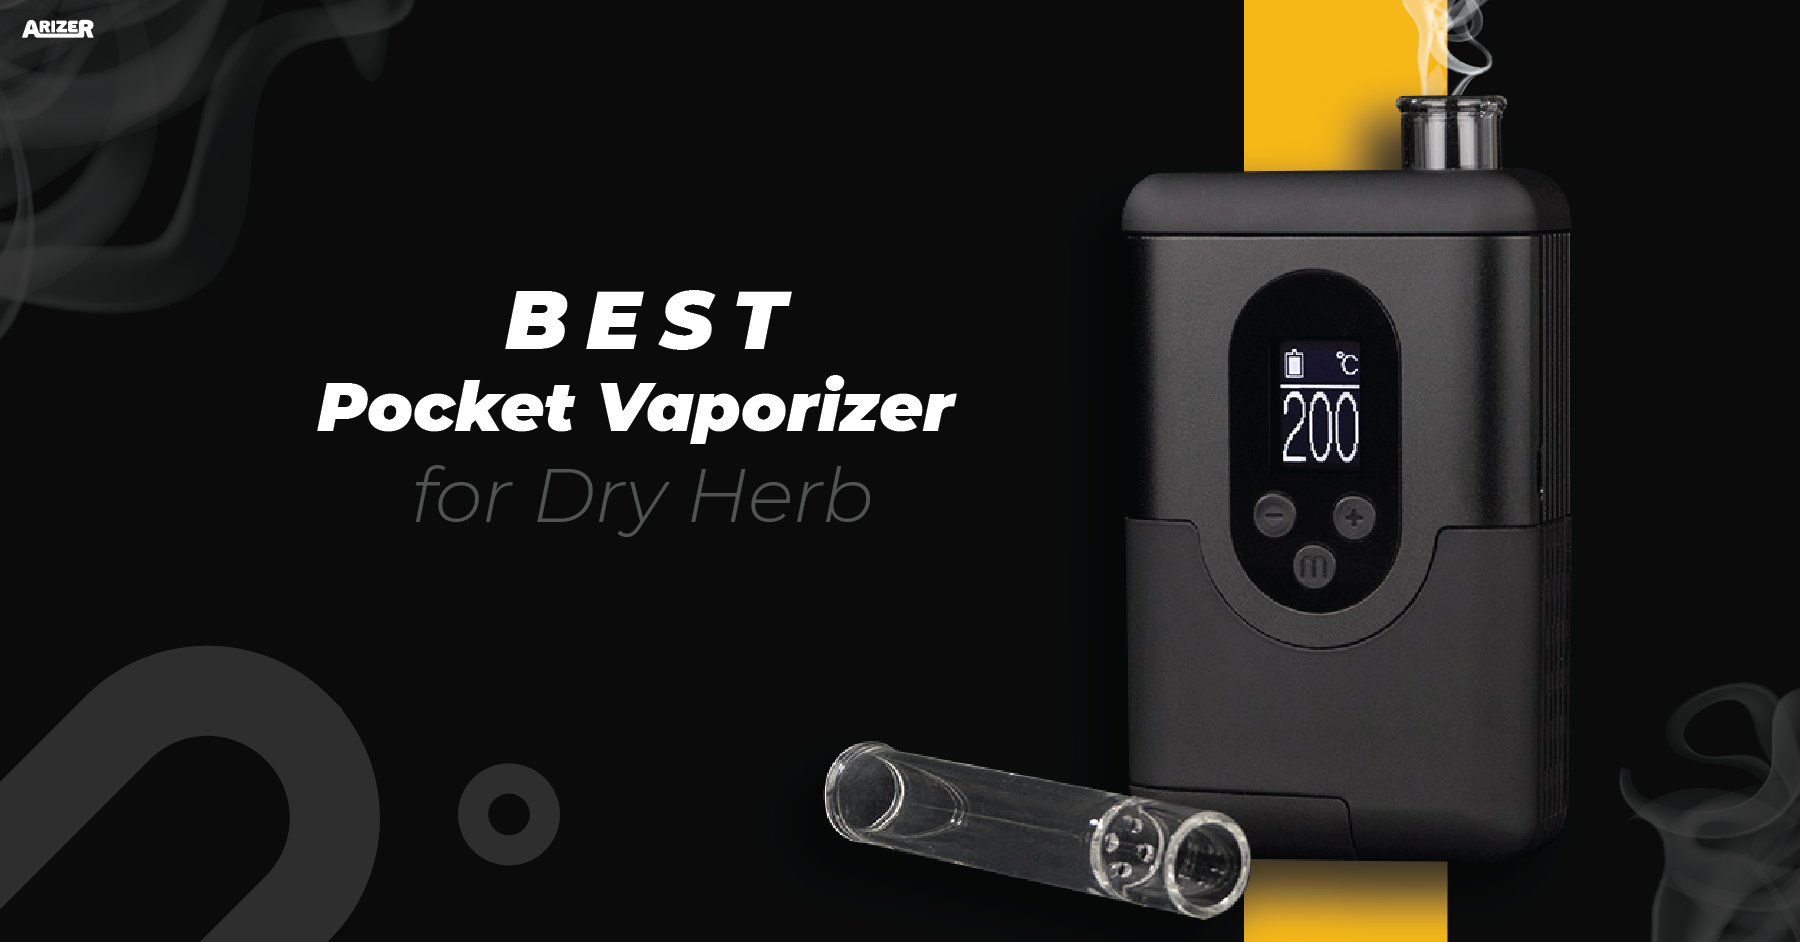 Unleash the Power of ArGo - The Best Pocket Vaporizer for Dry Herb